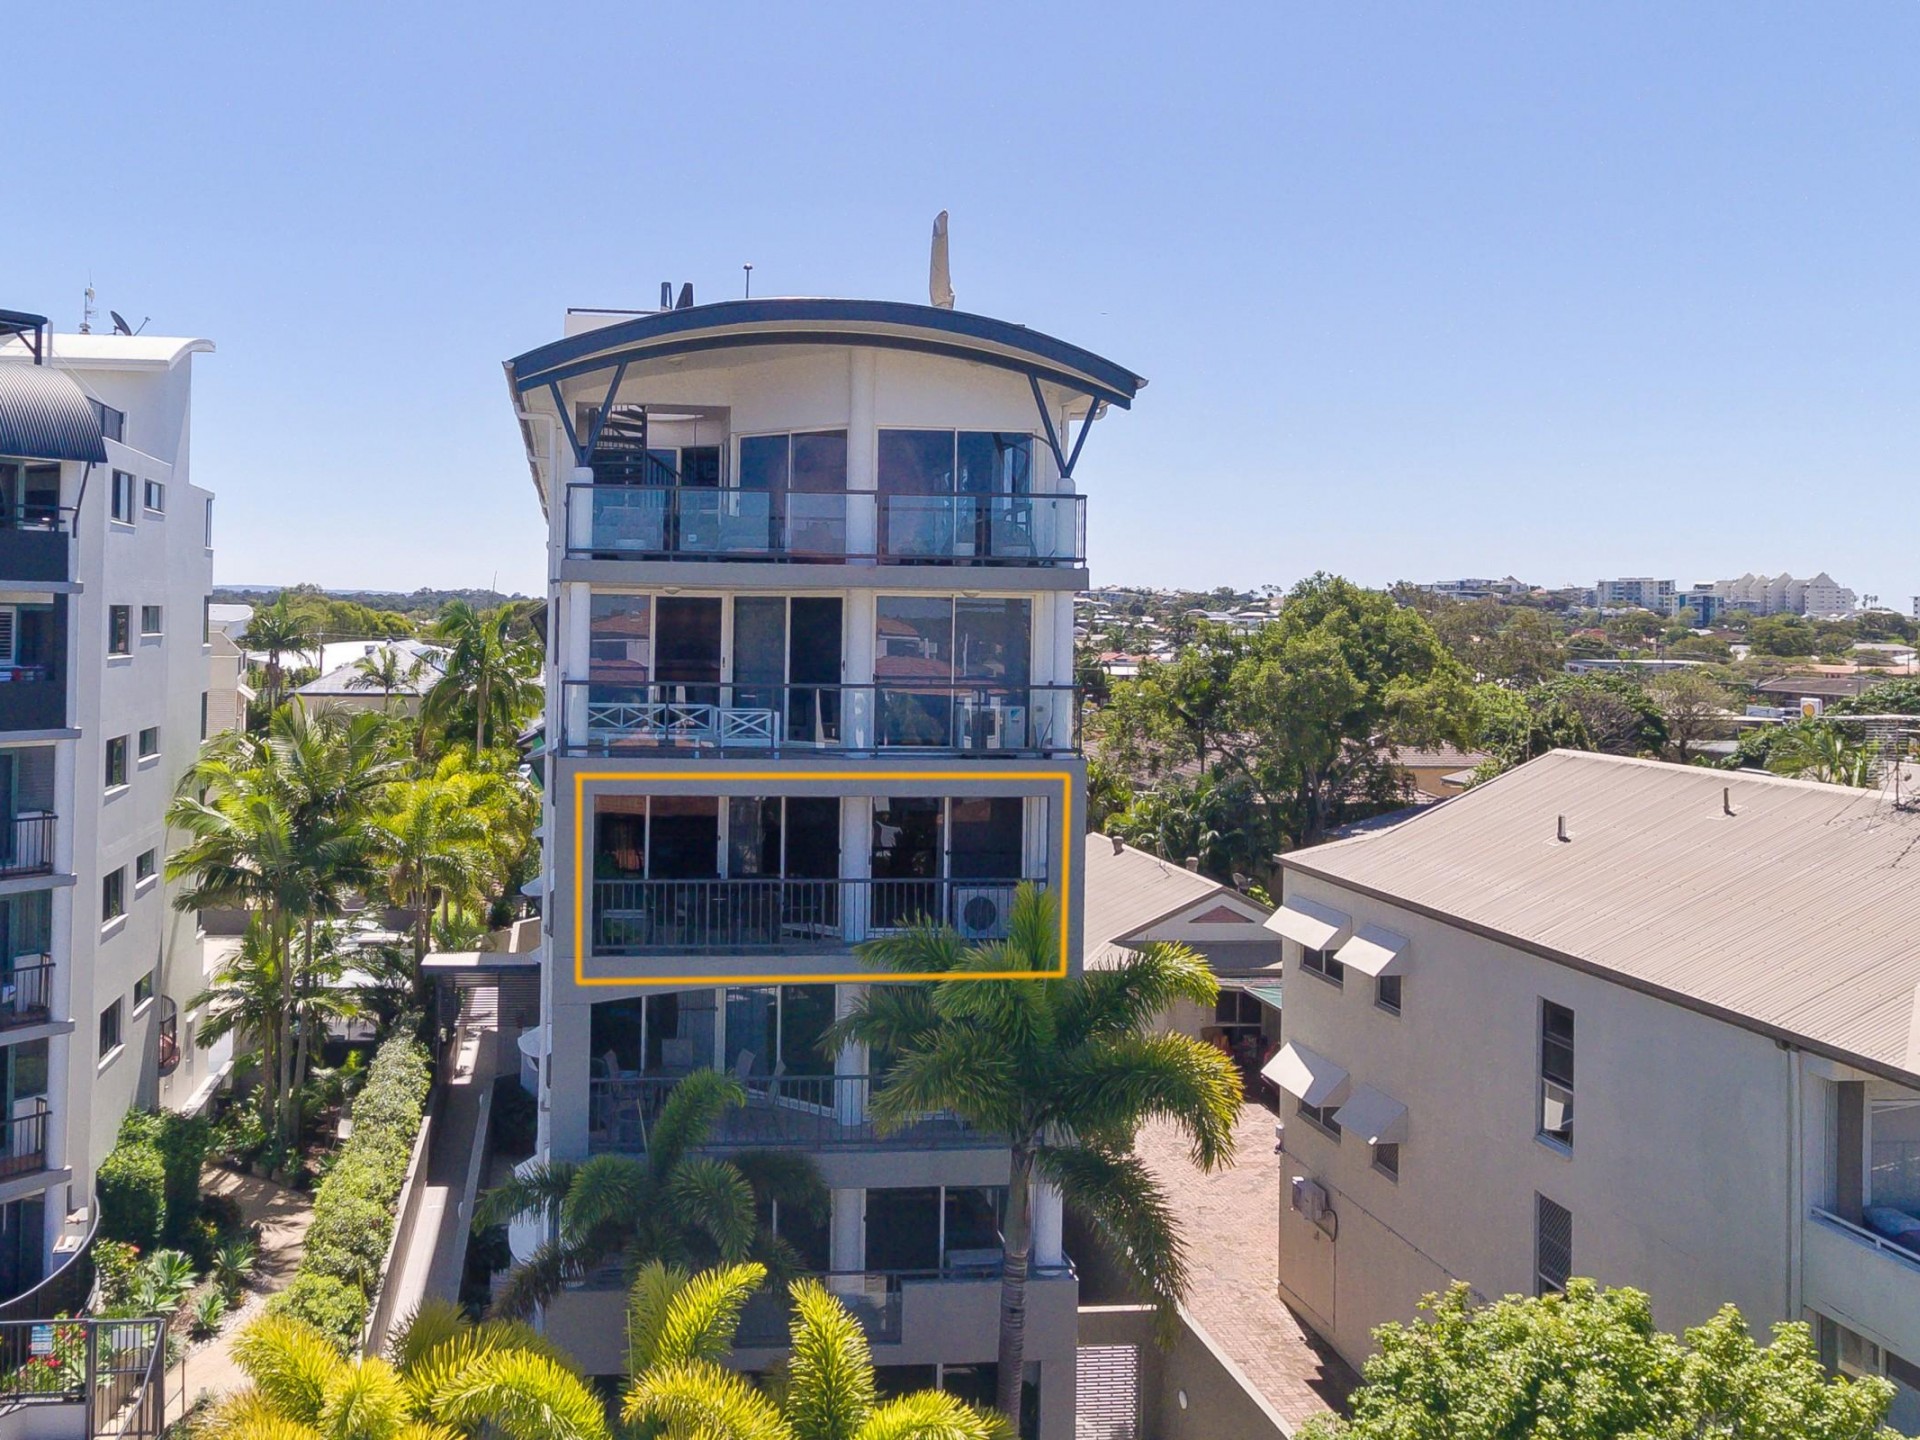 RIVA APARTMENTS MOOLOOLABA - A TRULY UNIQUE AND EXCLUSIVE LIFESTYLE OPPORTUNITY